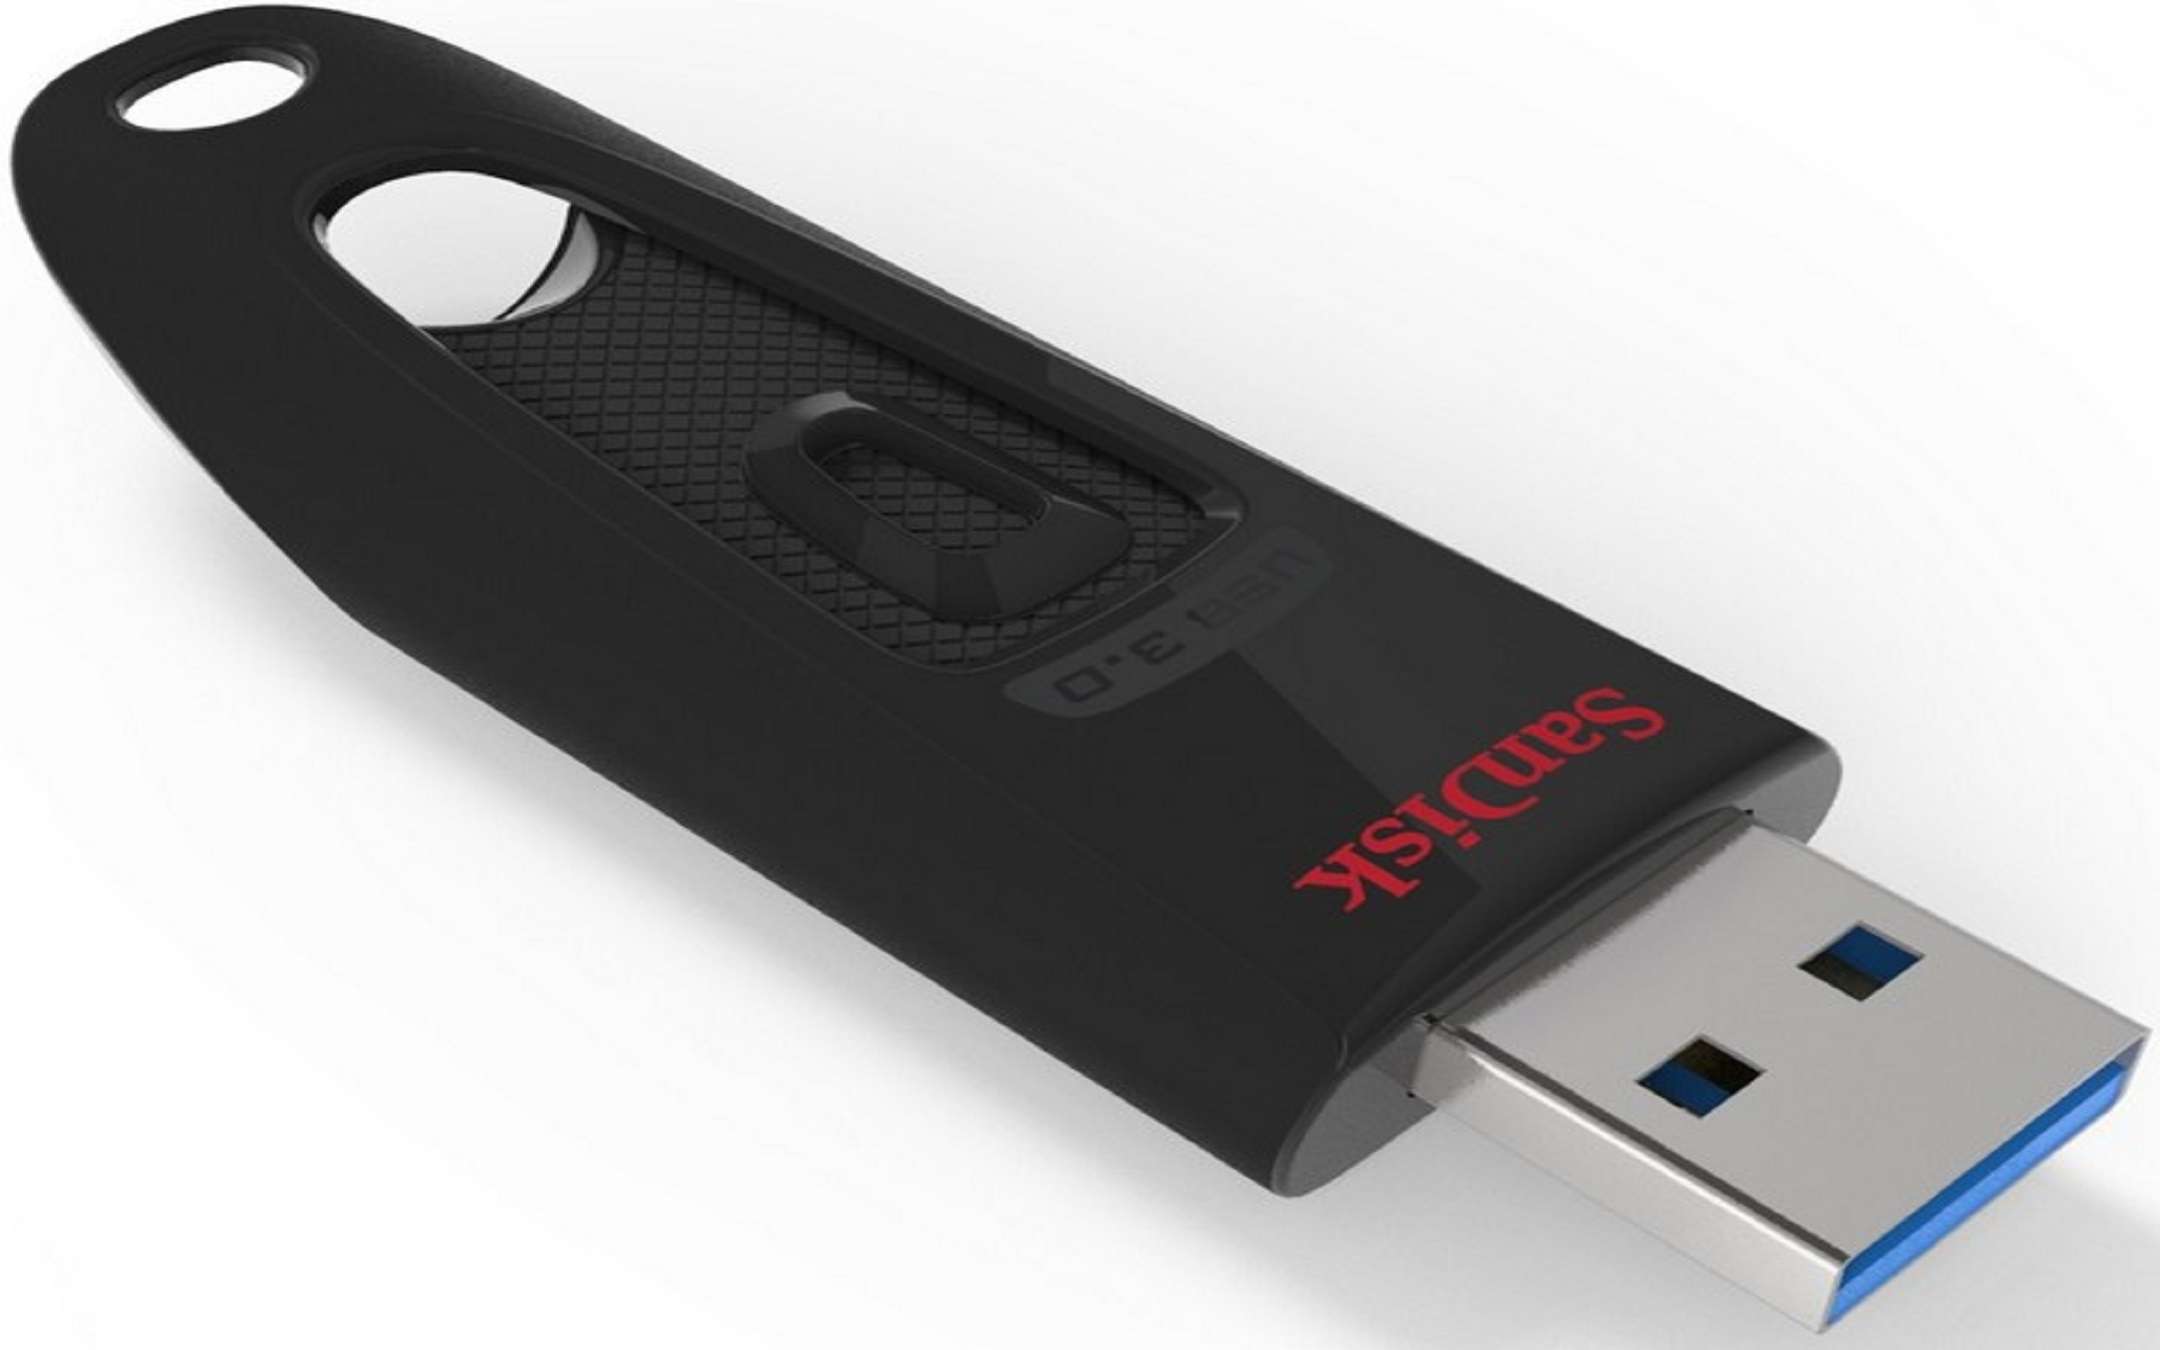 Sandisk Ultra USB 3.0 64GB discounted by 59%!